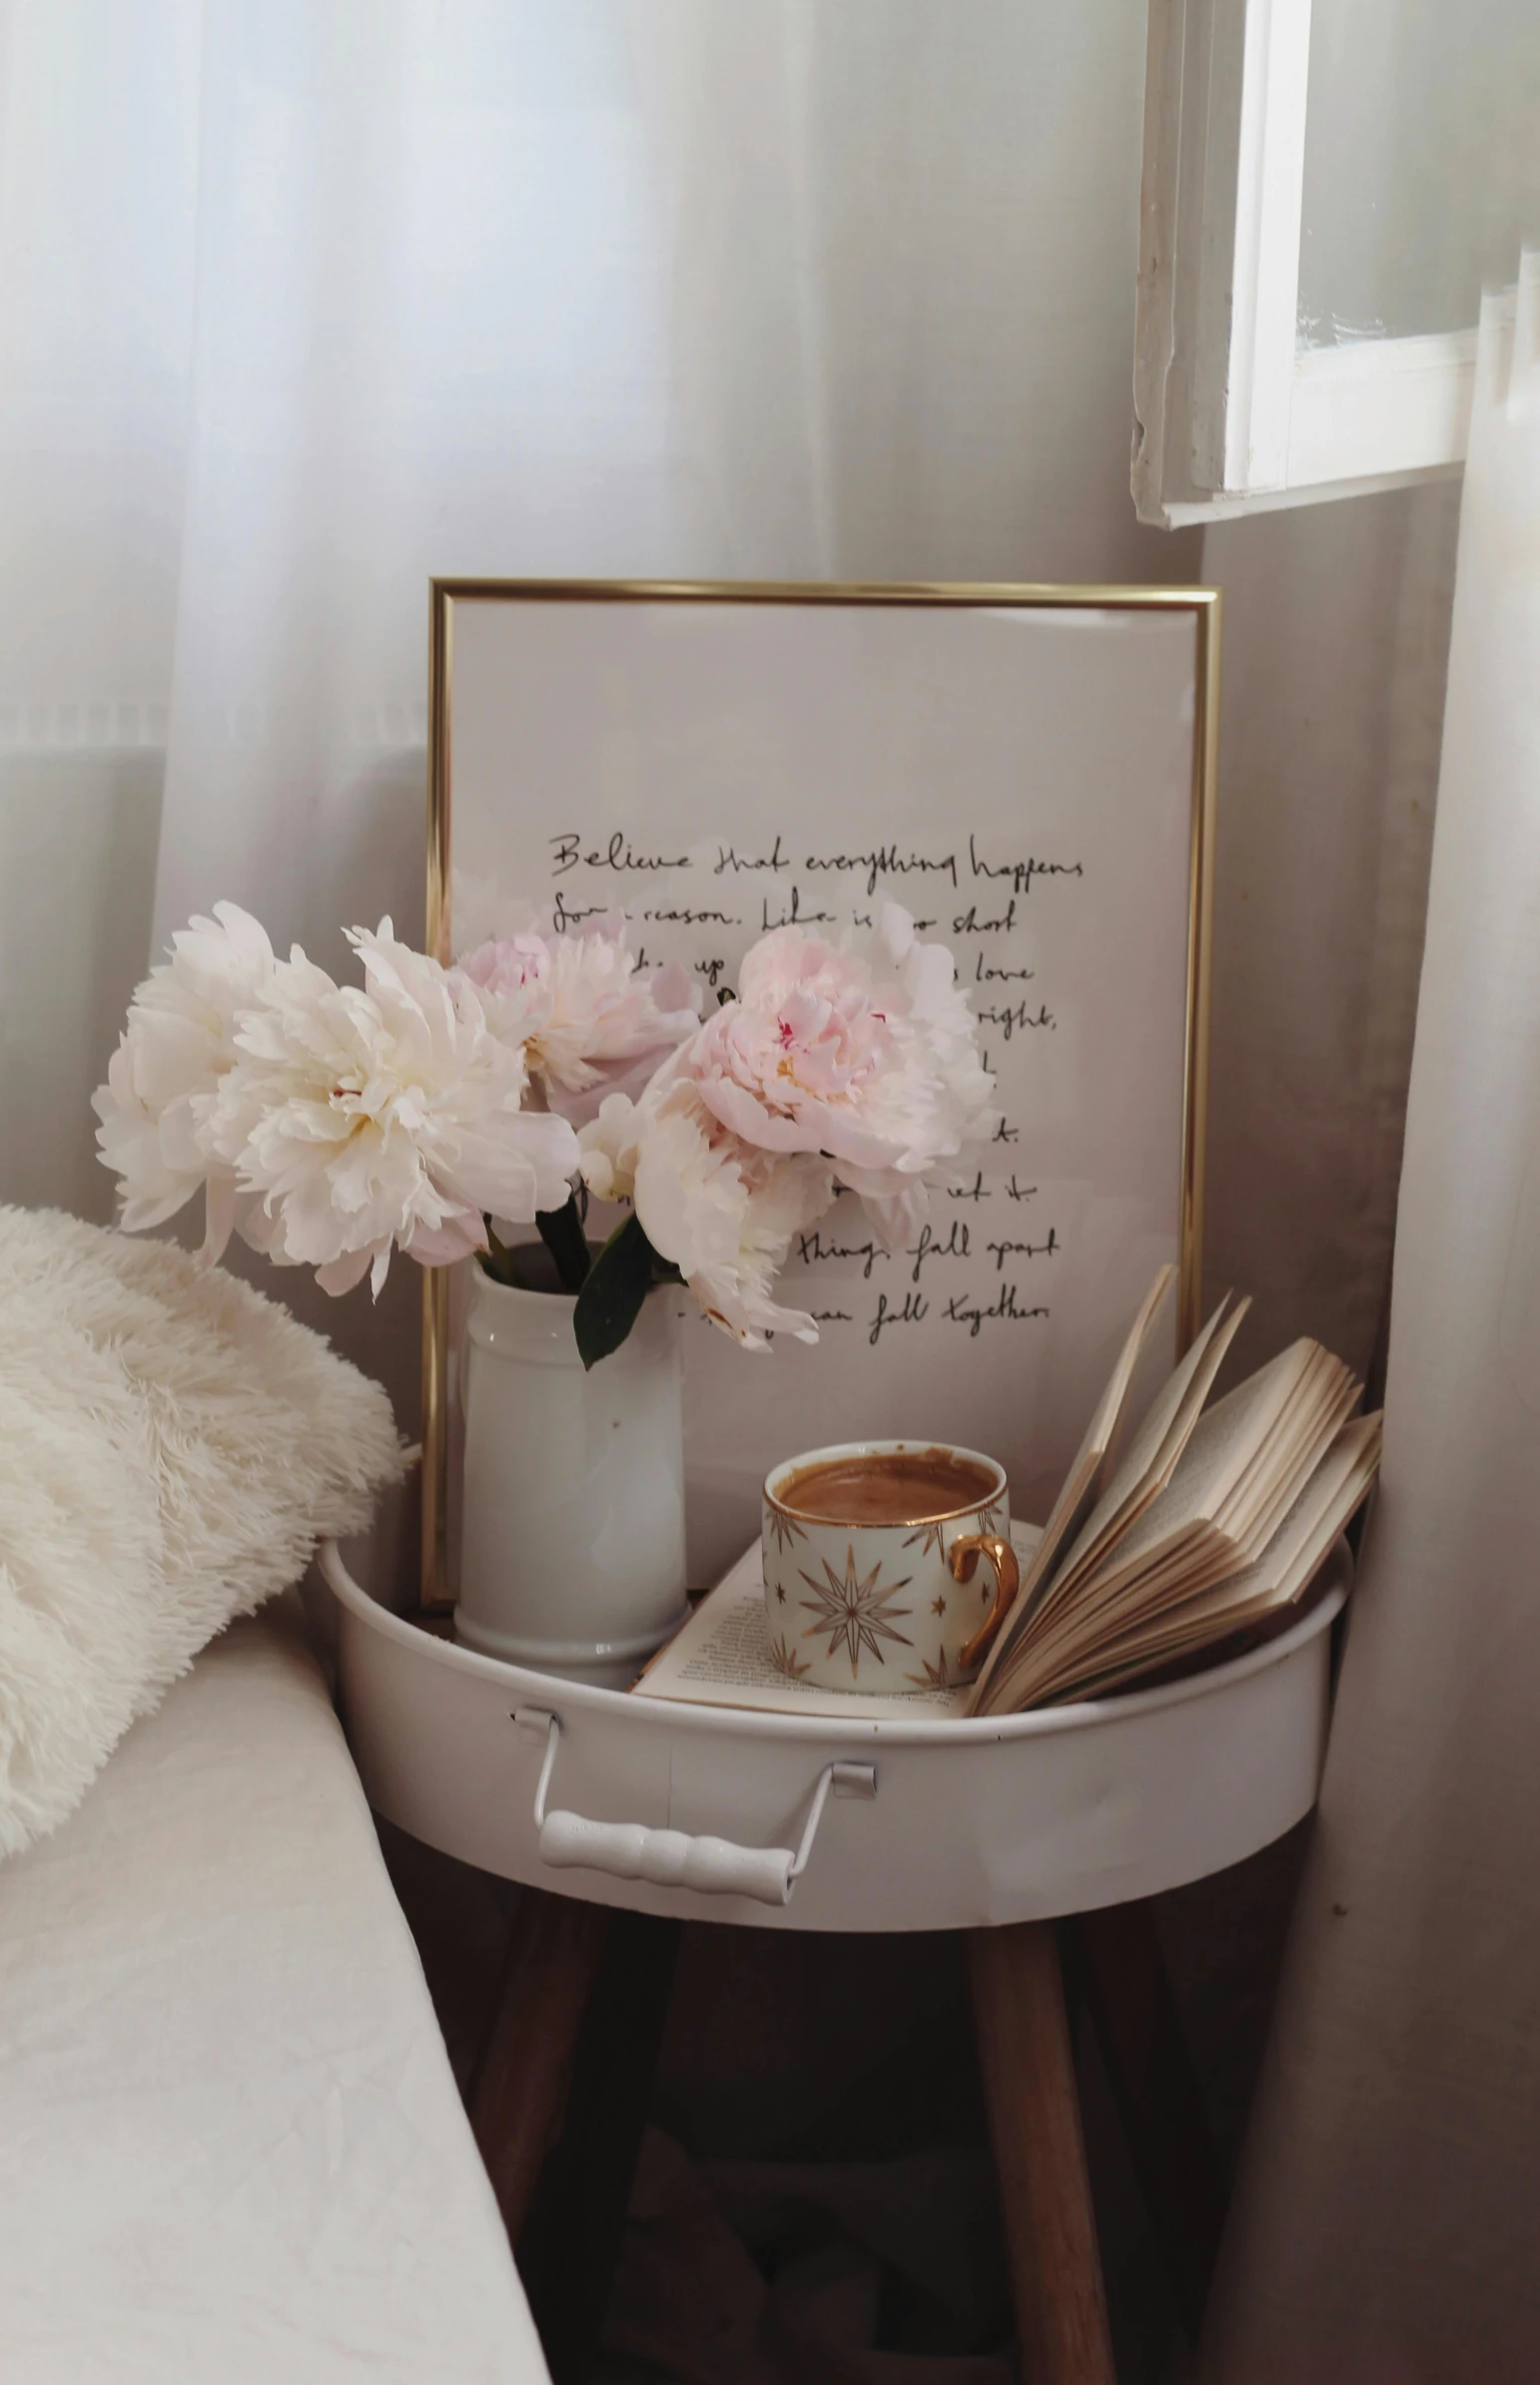 a bed room with a neatly made bed, a picture, by Sydney Carline, romanticism, flowers and gold, calligraphy, low quality photo, for displaying recipes